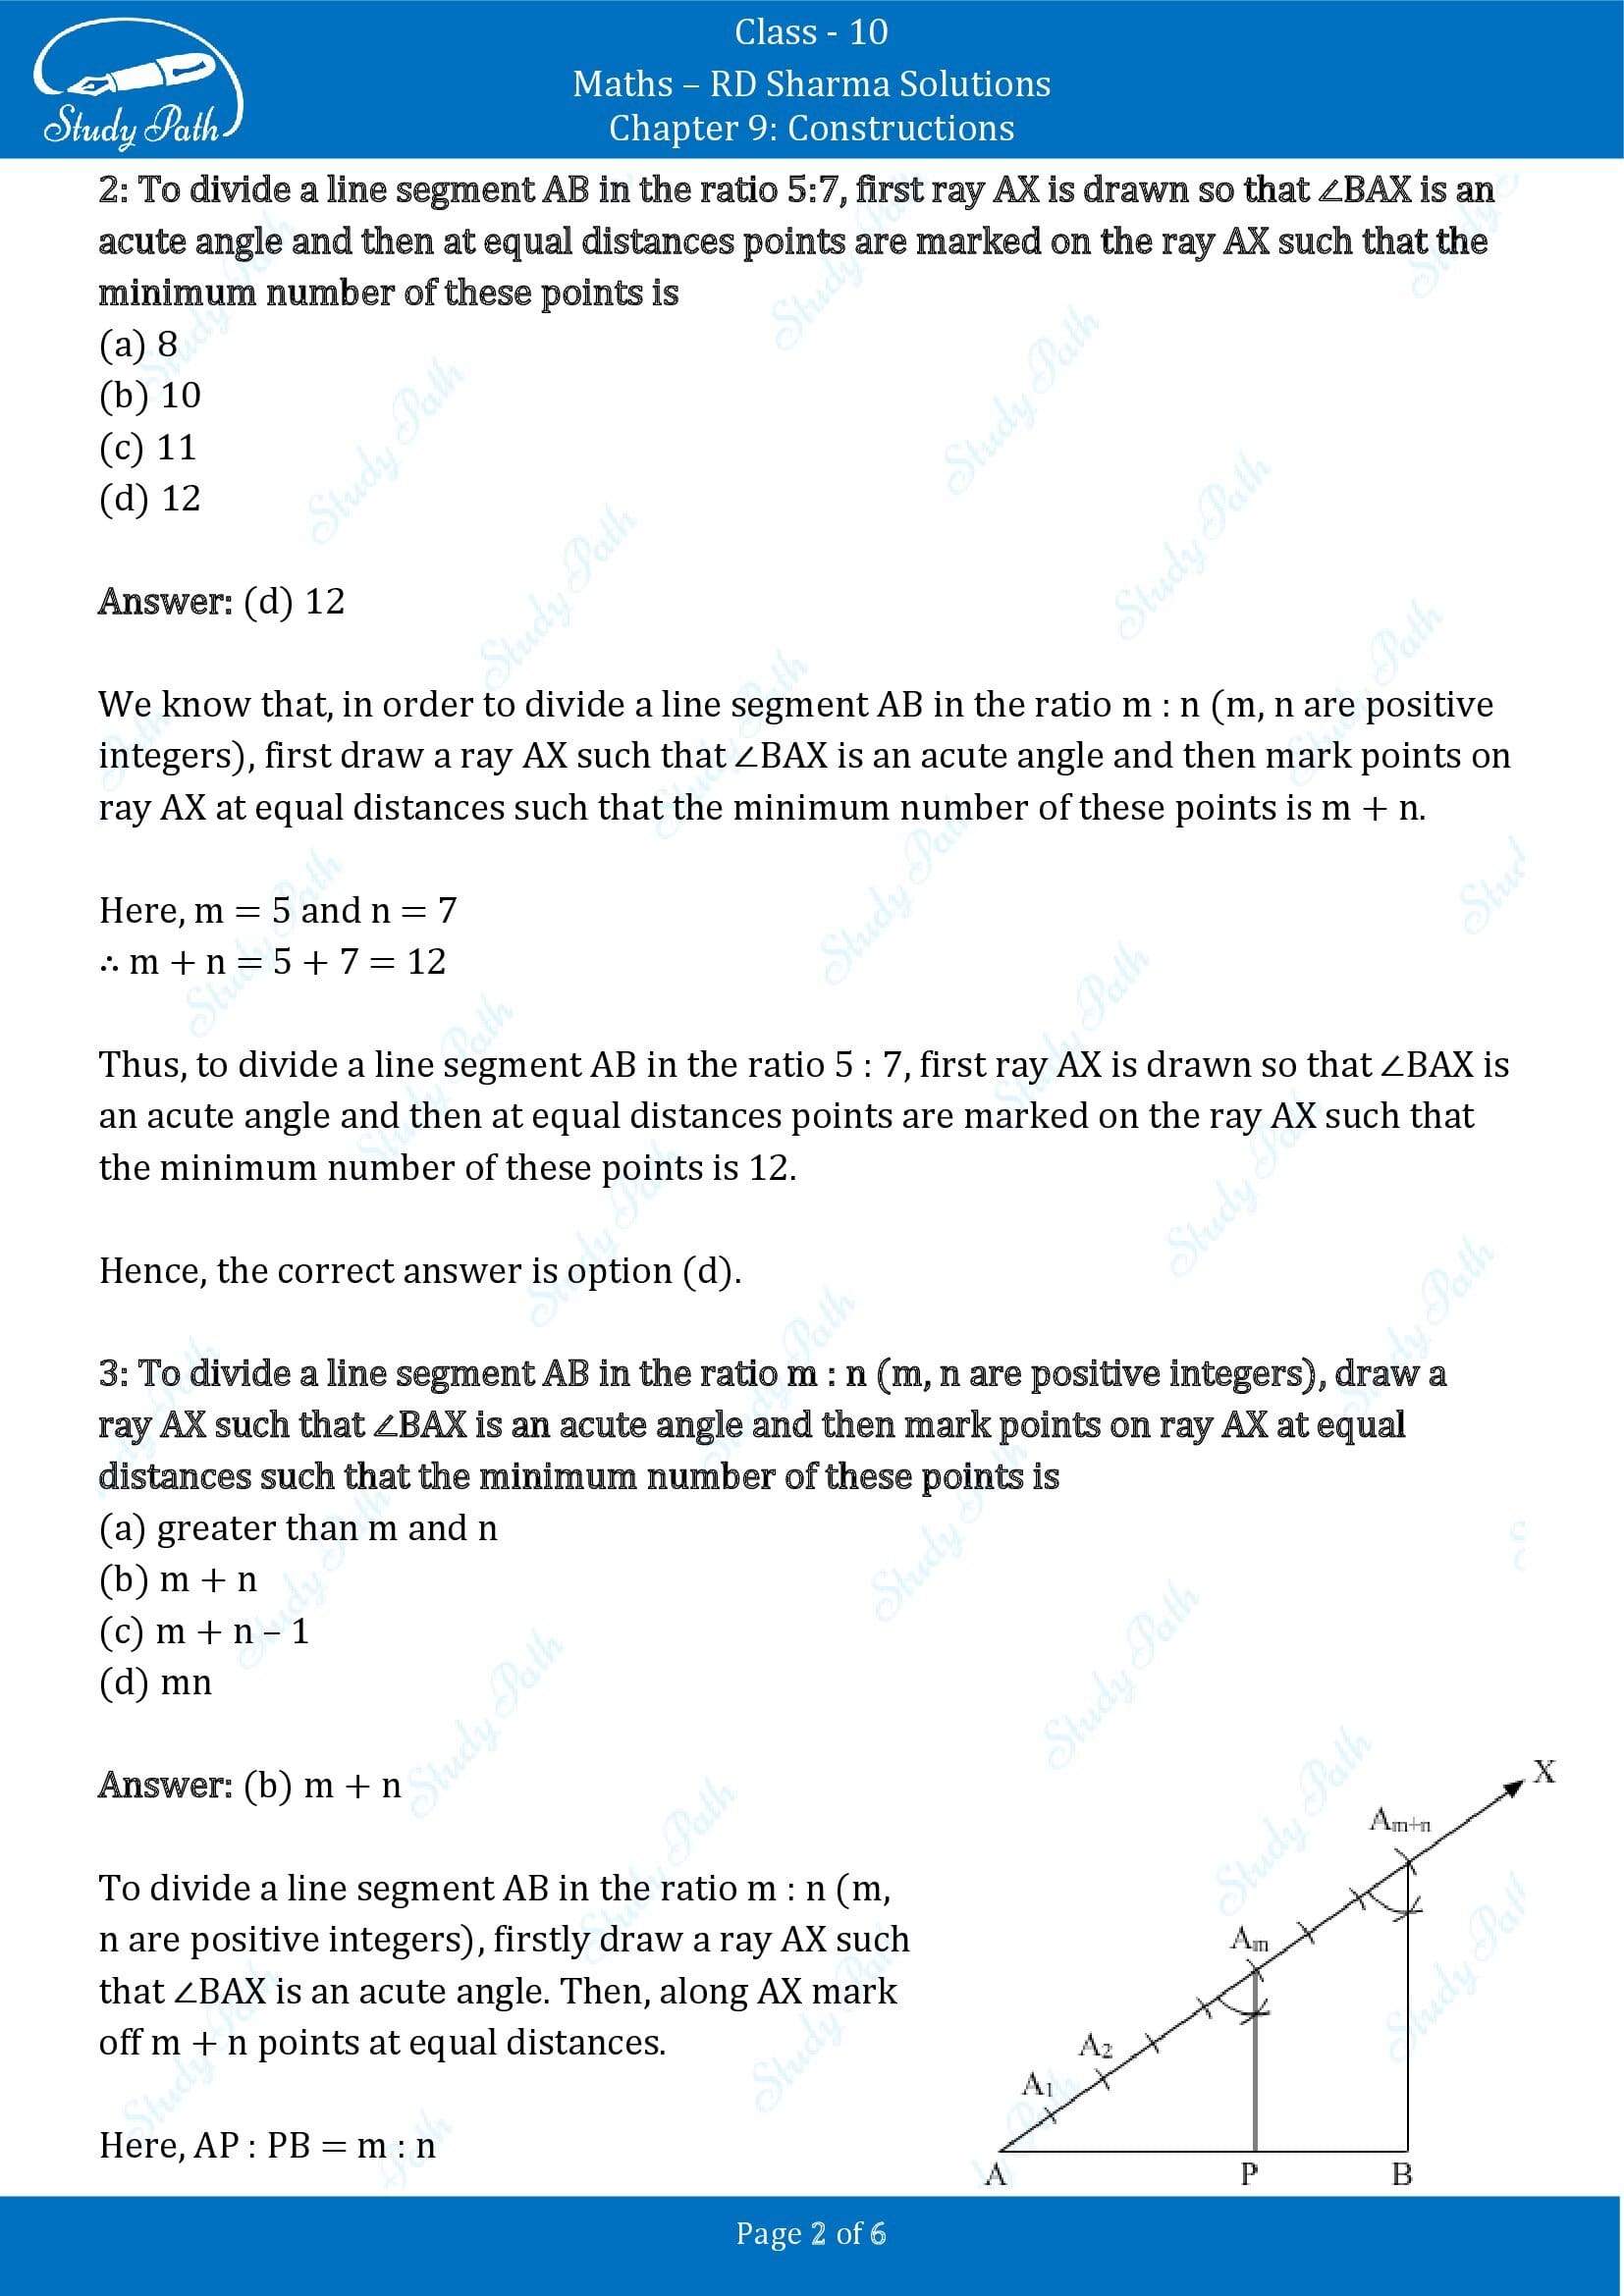 RD Sharma Solutions Class 10 Chapter 9 Constructions Multiple Choice Question MCQs 00002